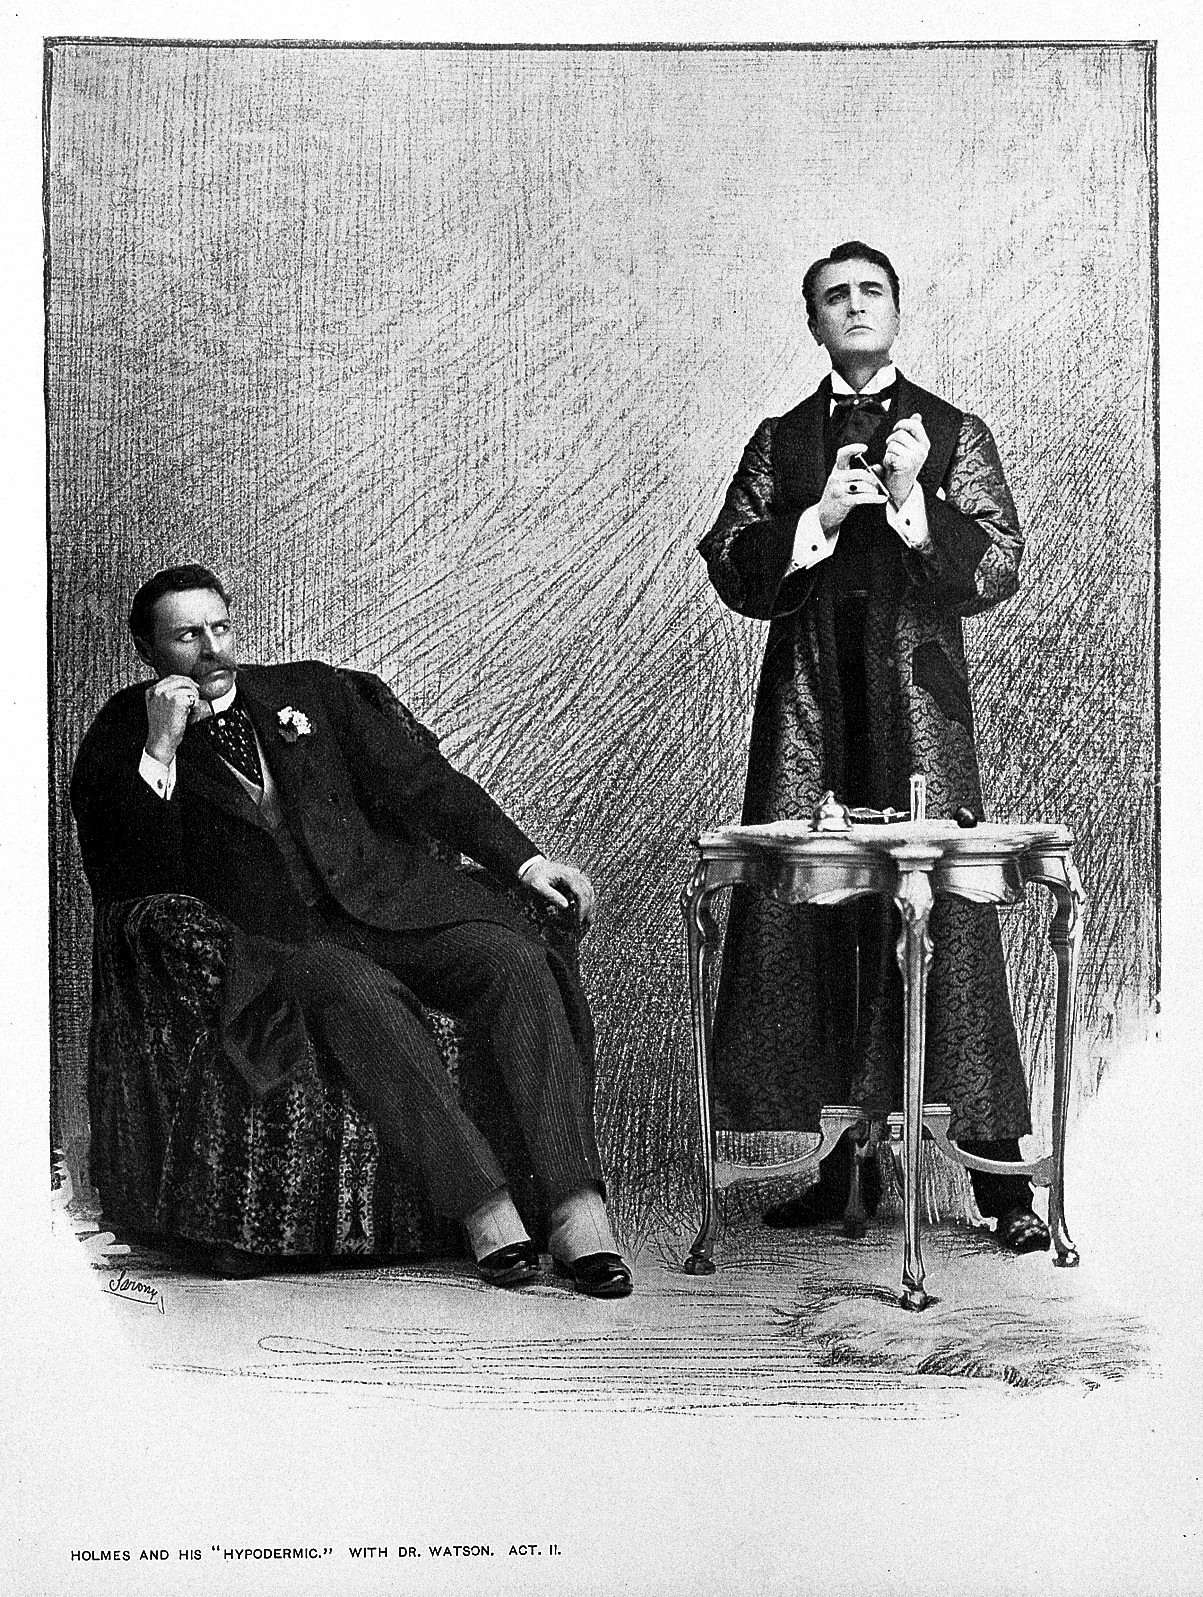 Black and white illustration of two men, one sitting in an armchair, and the other standing and holding a syringe